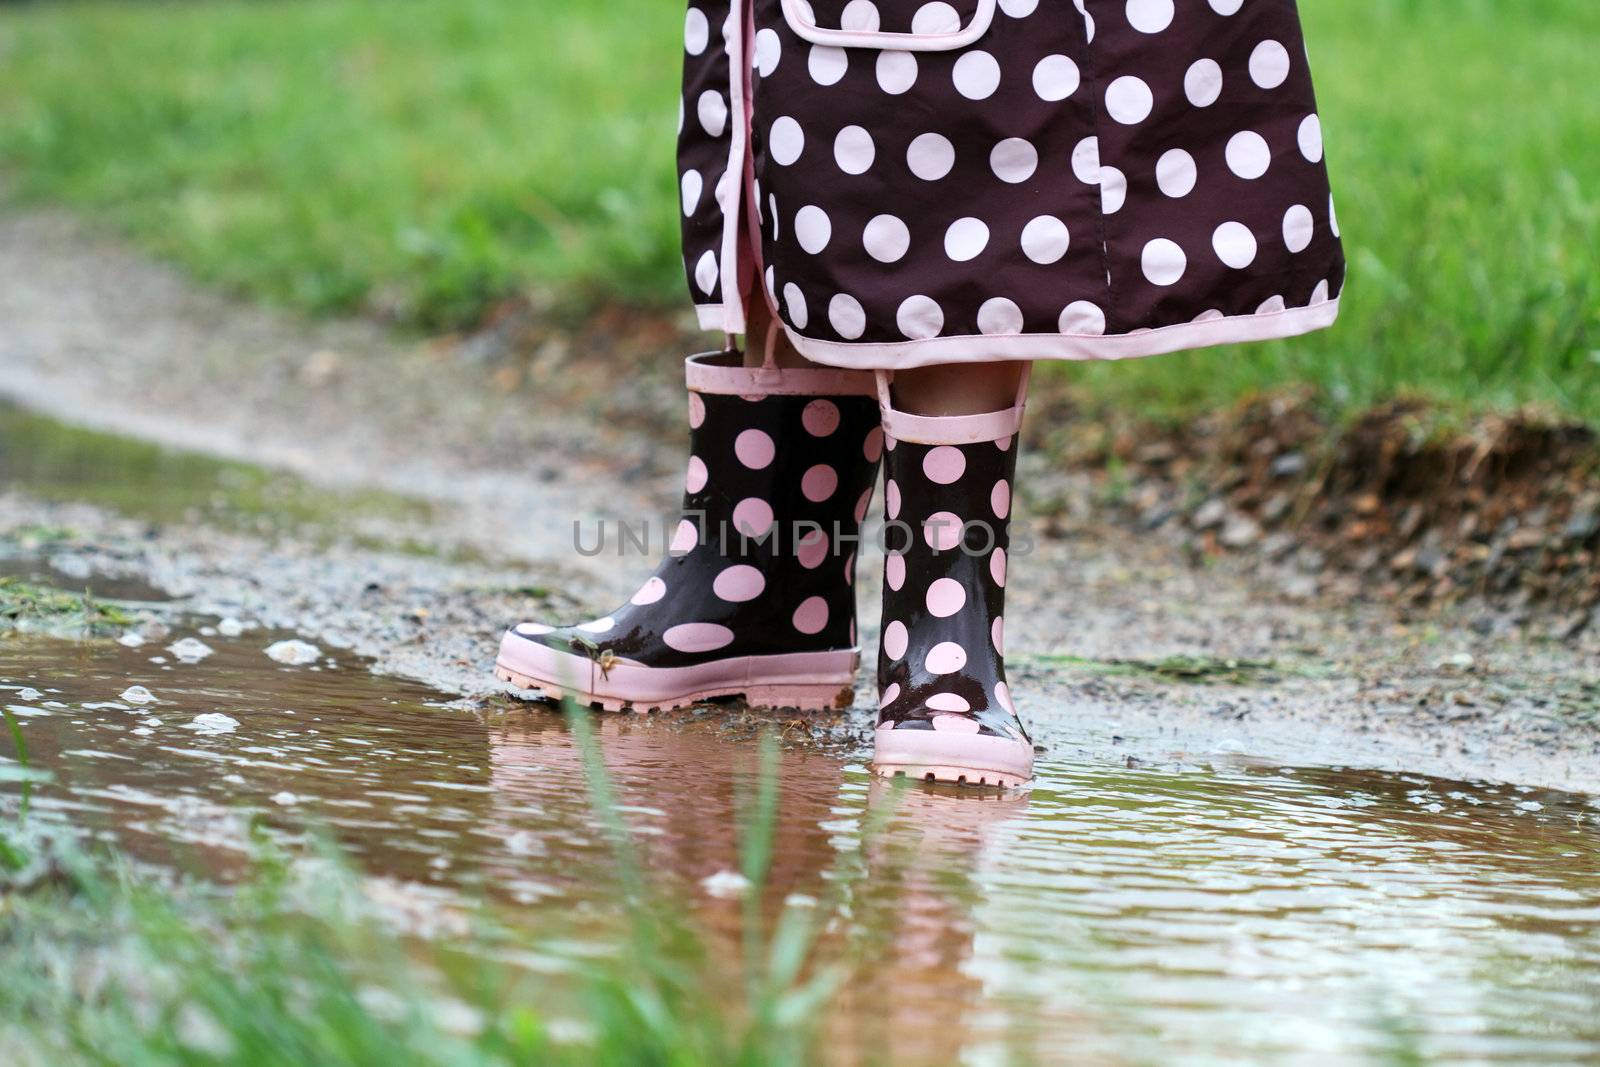 Child's feet playing in a mud puddle. 
